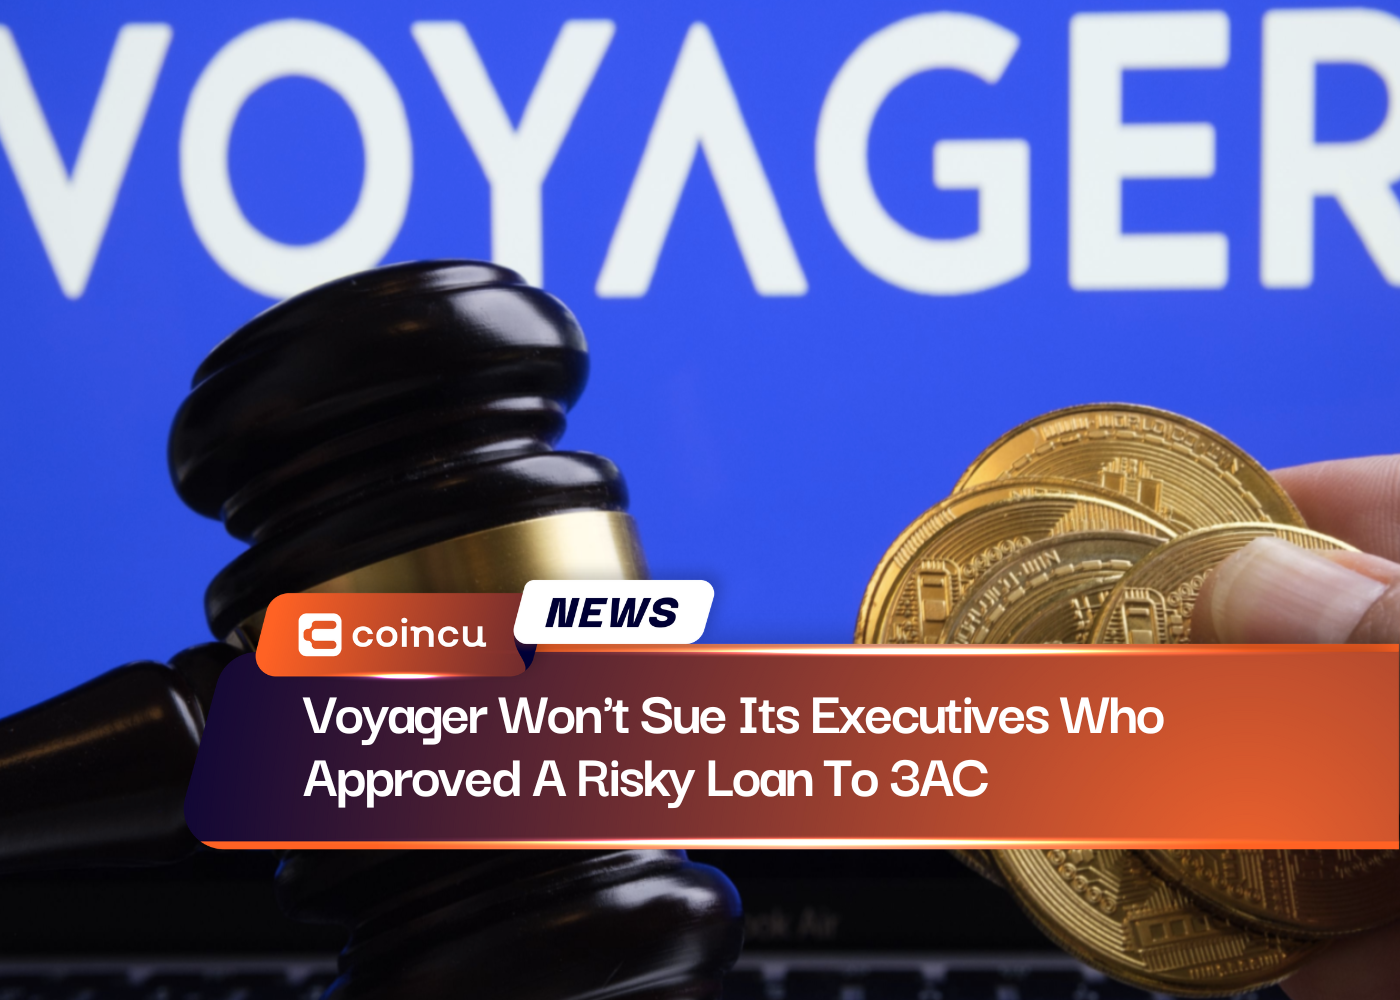 Voyager Won't Sue Its Executives Who Approved A Risky Loan To 3AC